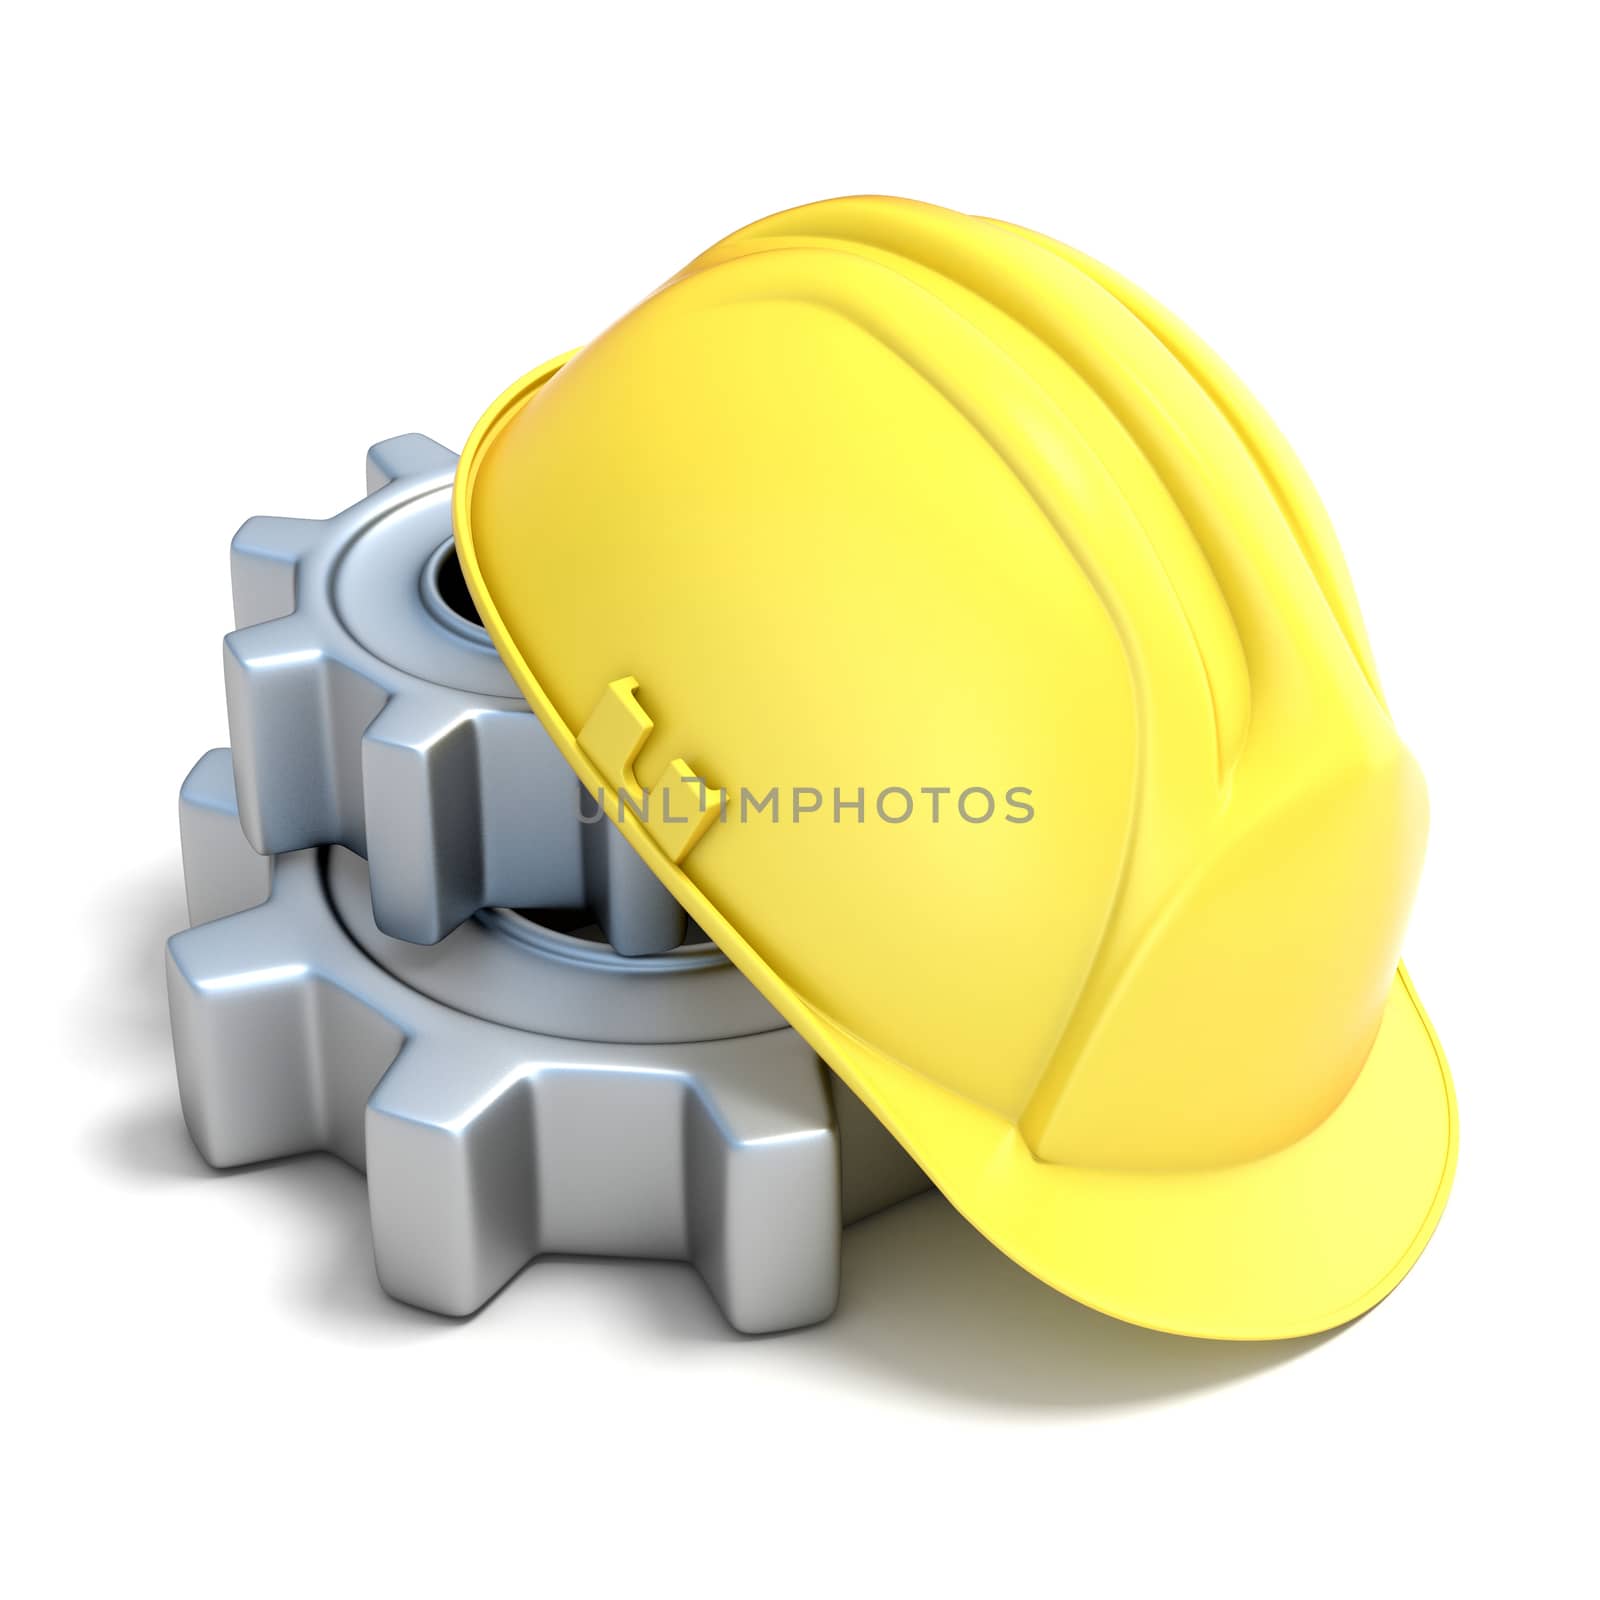 Machine gear with safe helmet. 3D render illustration isolated on white background